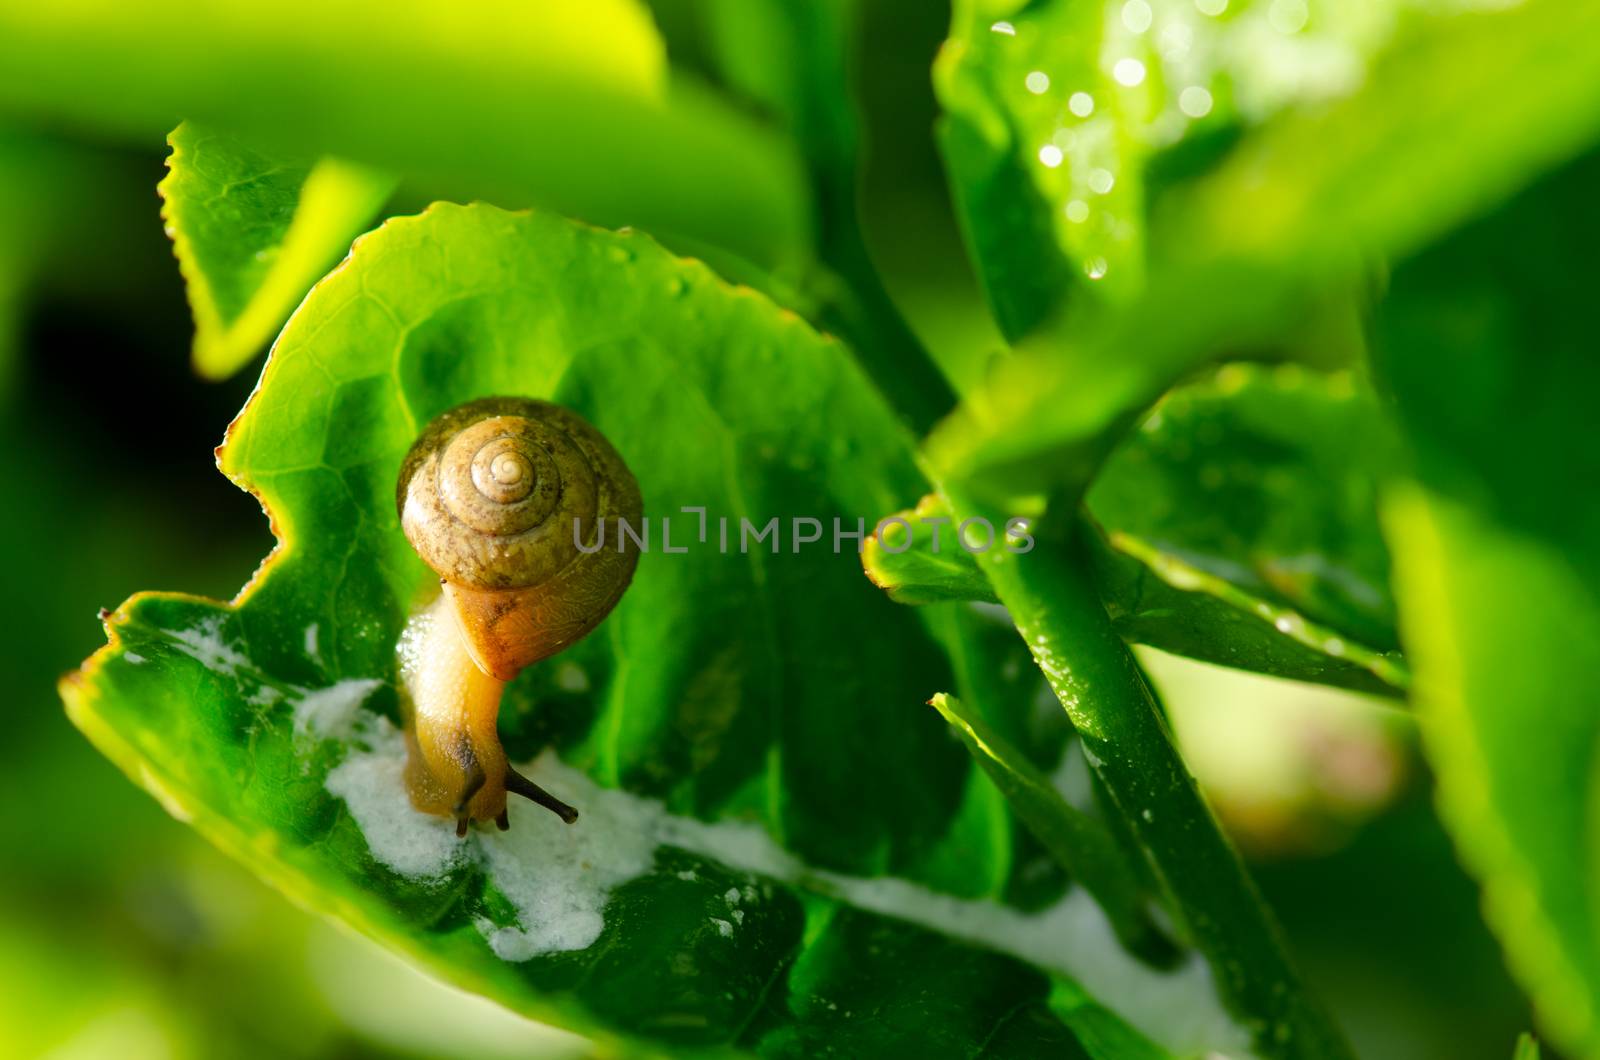 Snail crawling on tea leaf in morning close up.